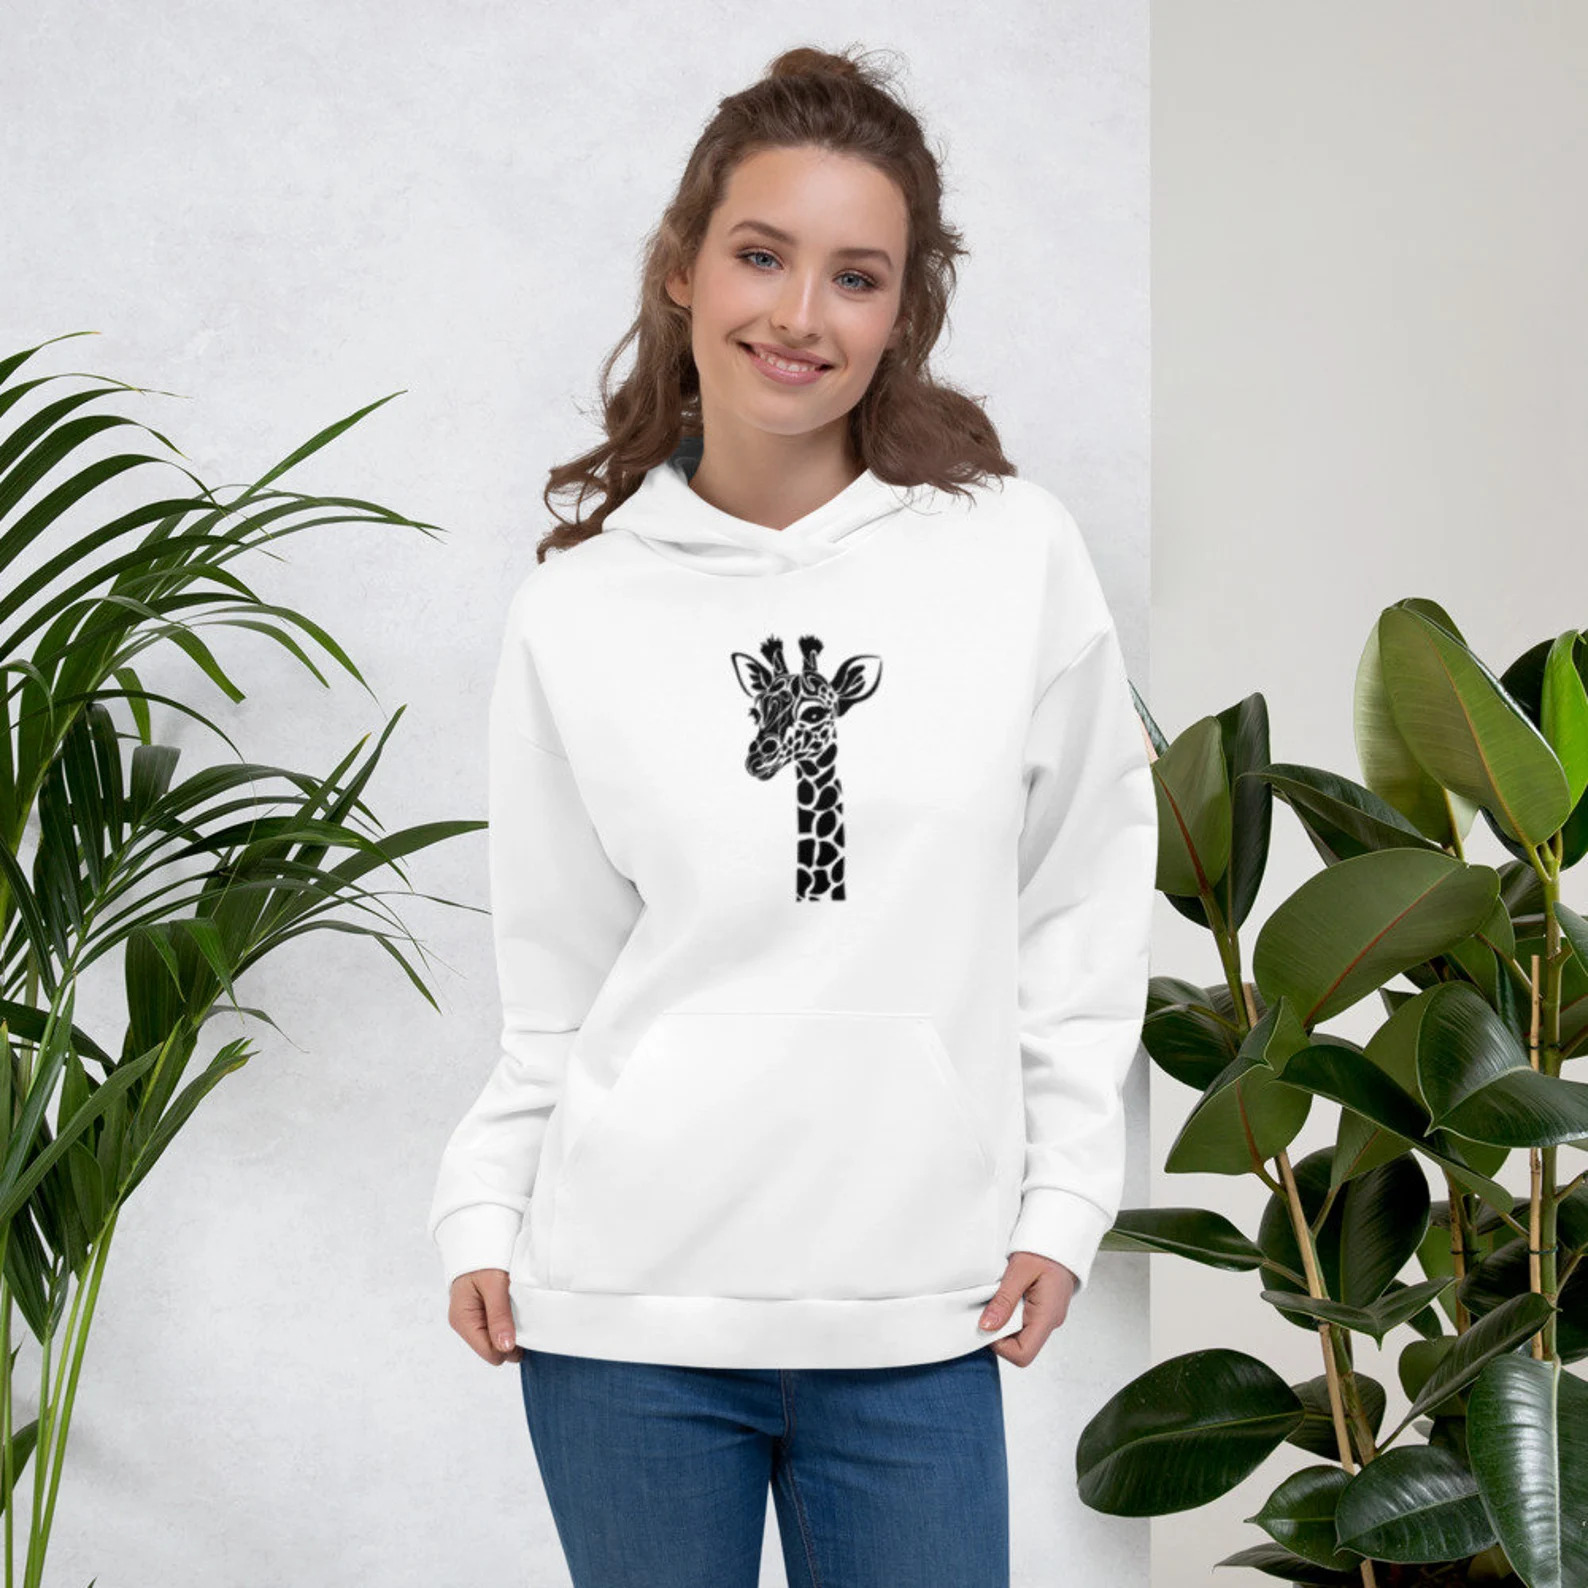 Woman wearing a white hoodie with a giraffe on it.